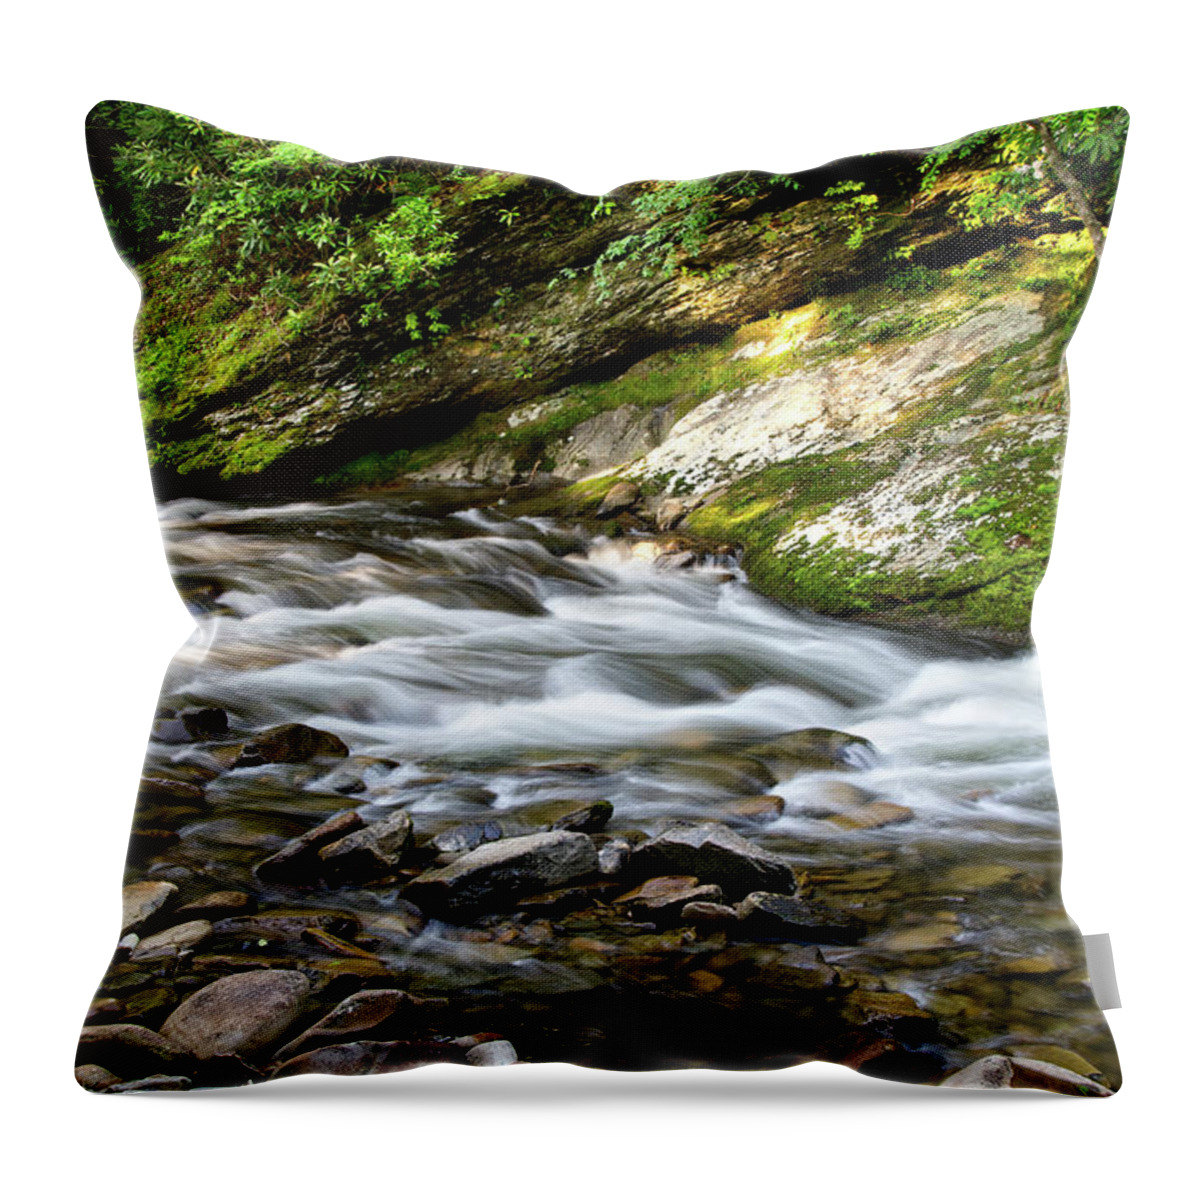 Little River Throw Pillow featuring the photograph Cascades On Little River 2 by Phil Perkins